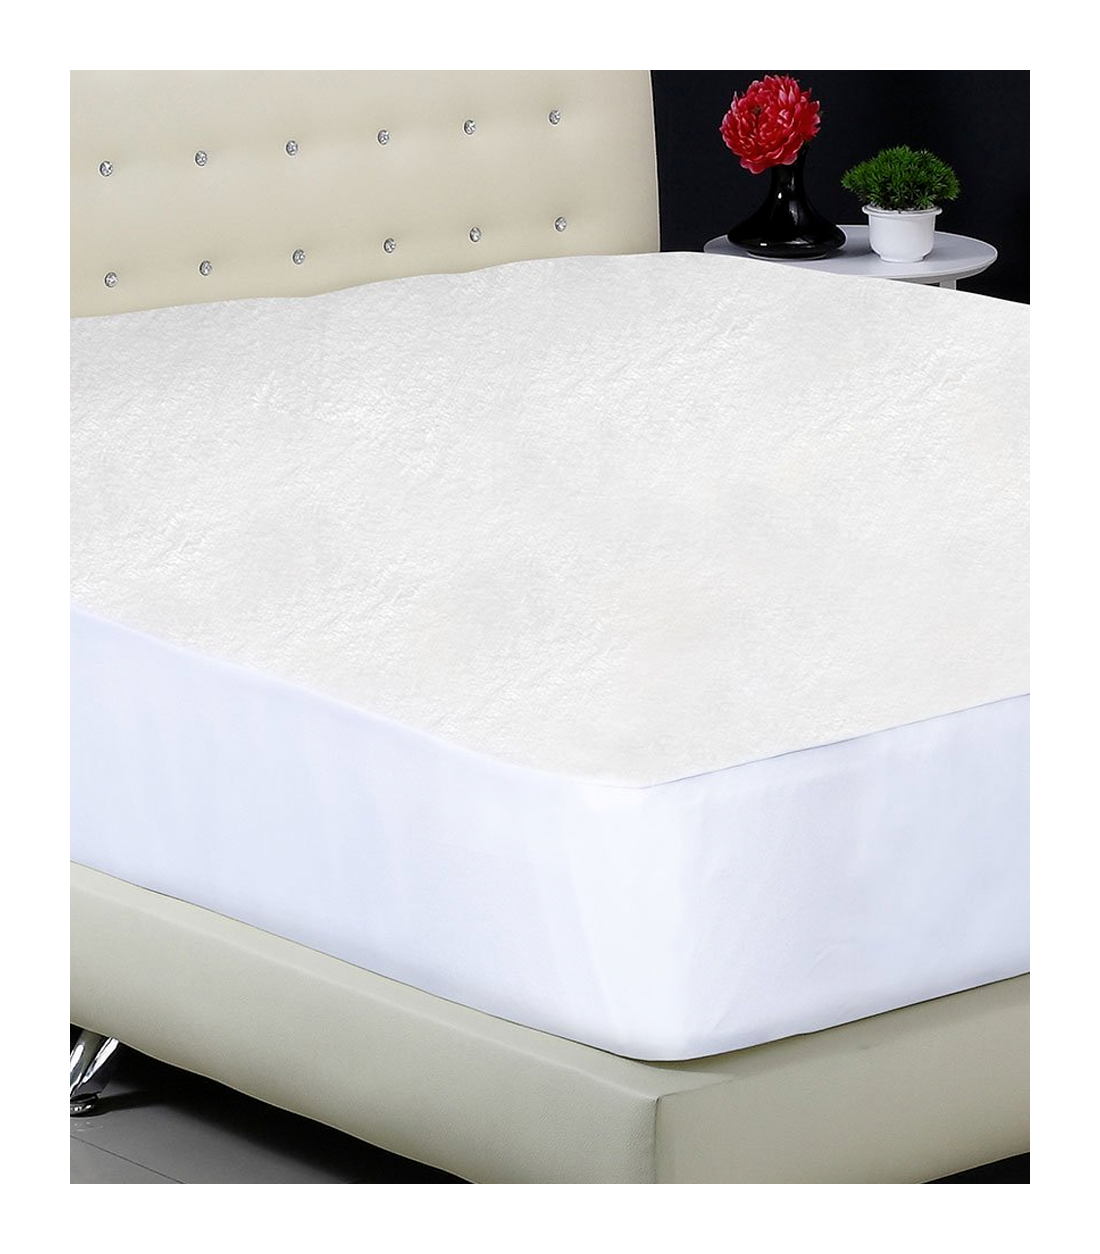 2. It can extend the life of your mattress.